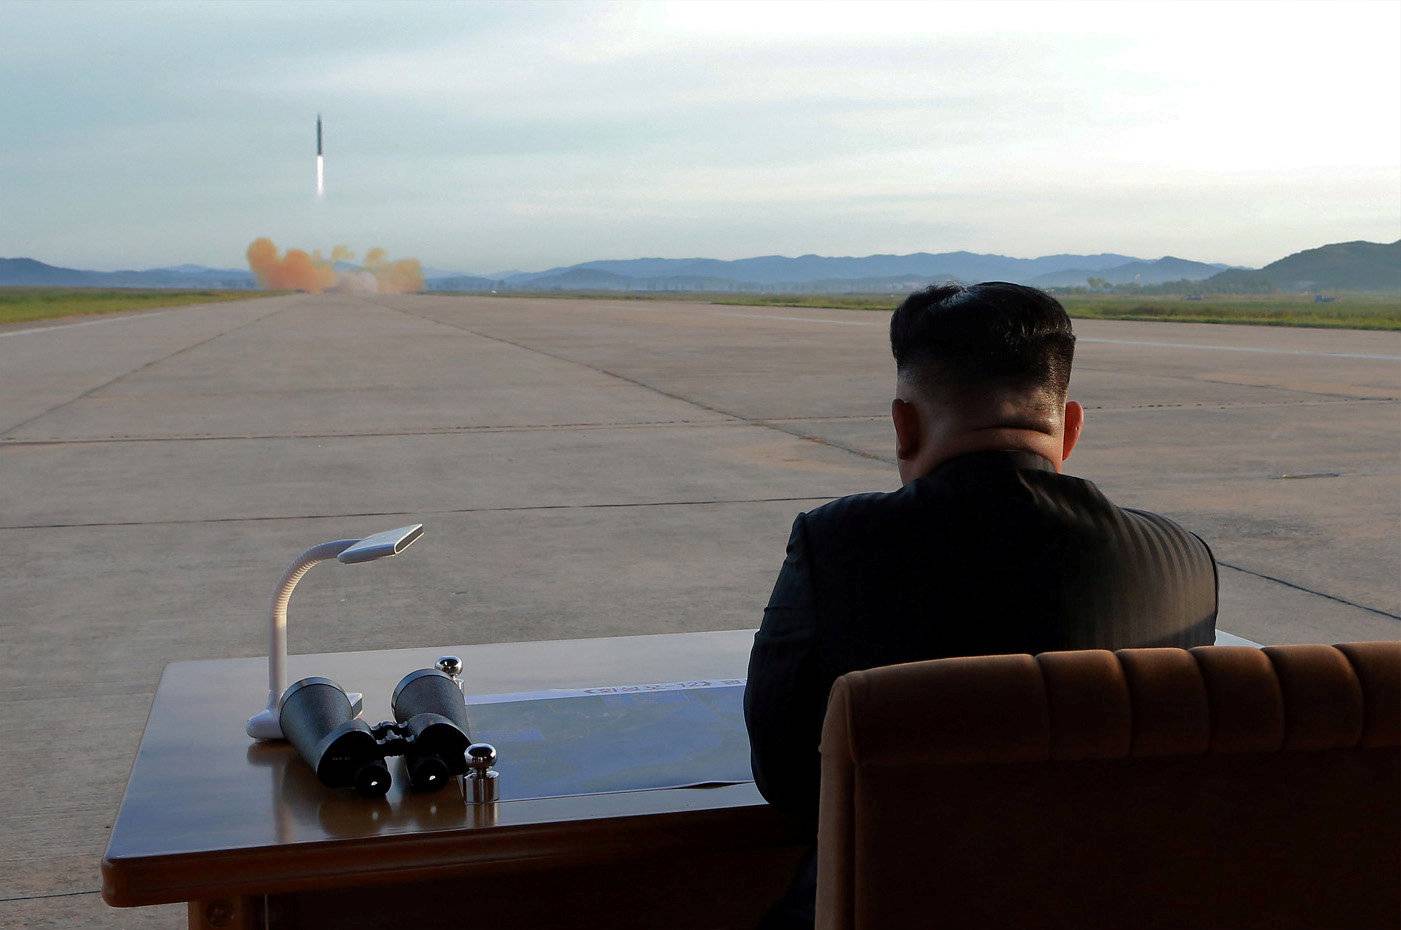 North Korean leader Kim Jong Un watches the launch of a Hwasong-12 missile in this undated photo released by North Korea's KCNA